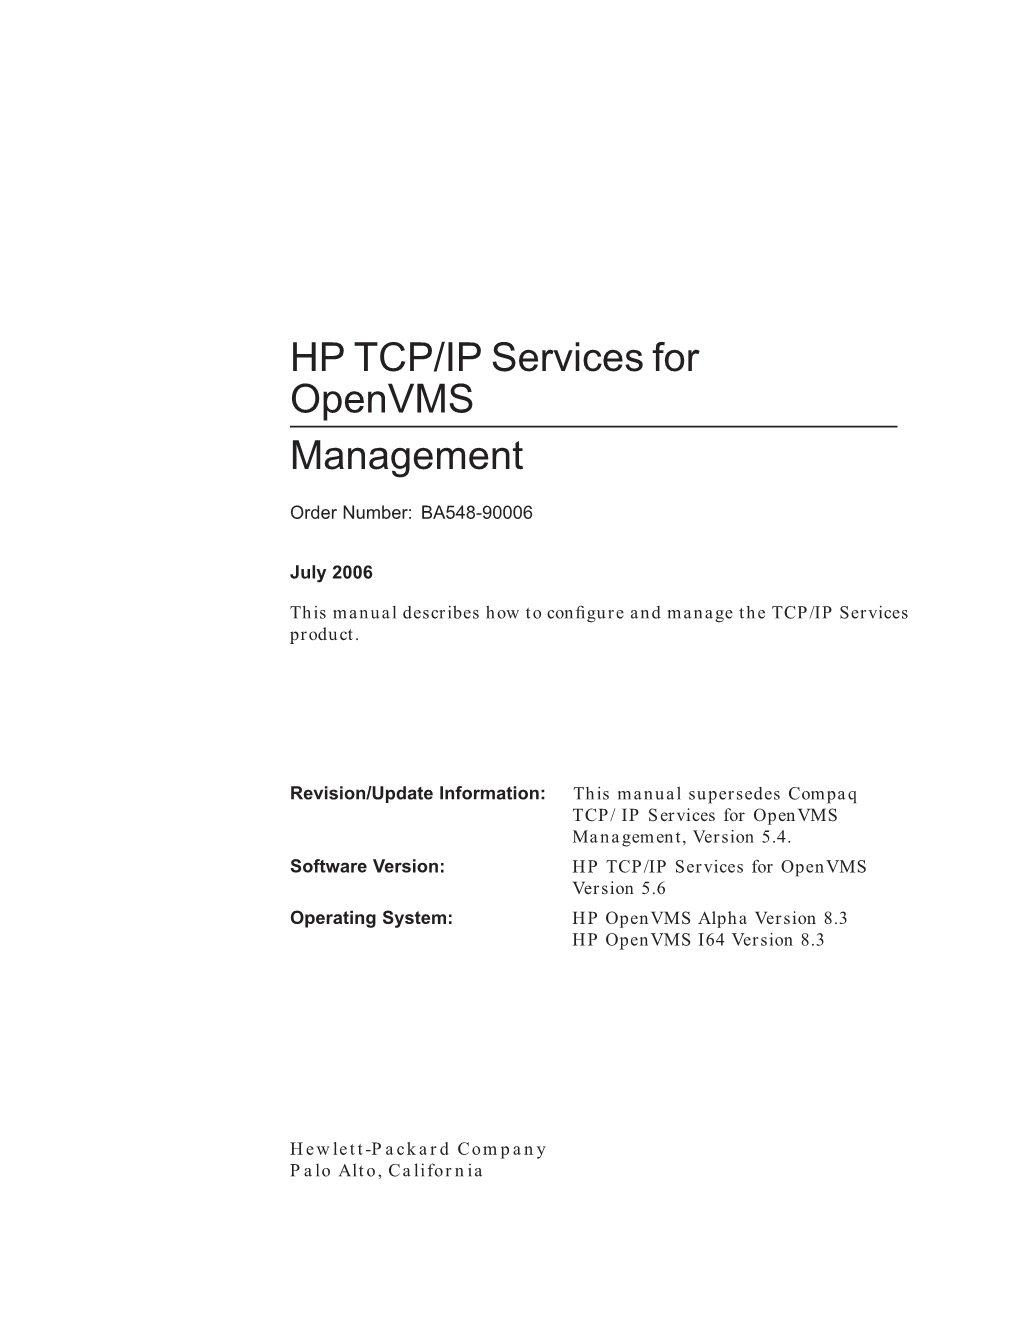 HP TCP/IP Services for Openvms Management